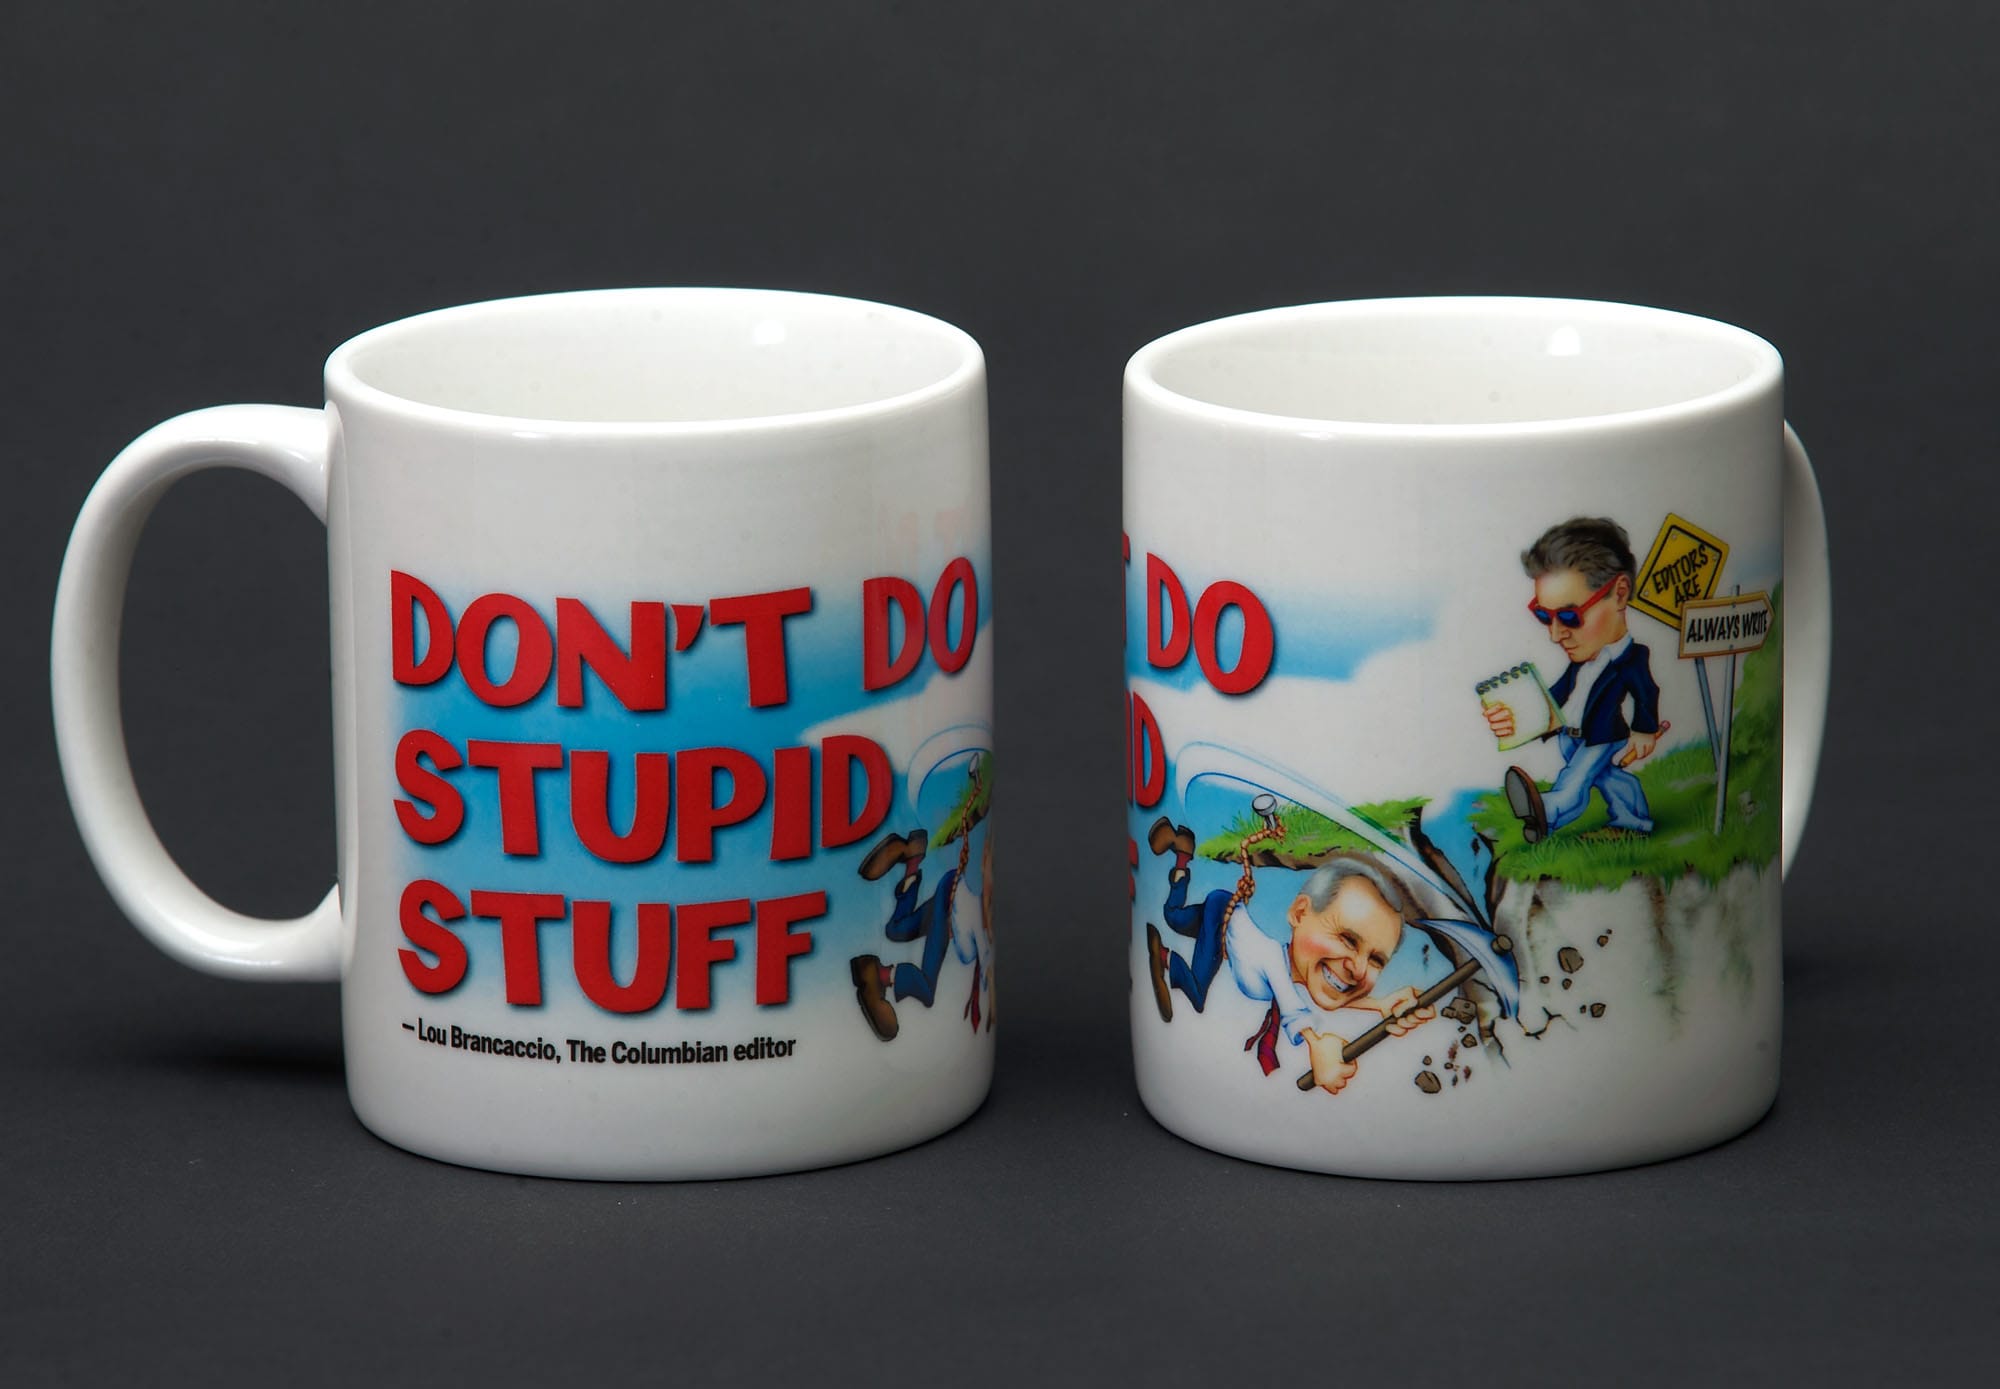 Lou Brancaccio will be selling Don't Do Stupid Stuff mugs today at The Columbian, 701 W.